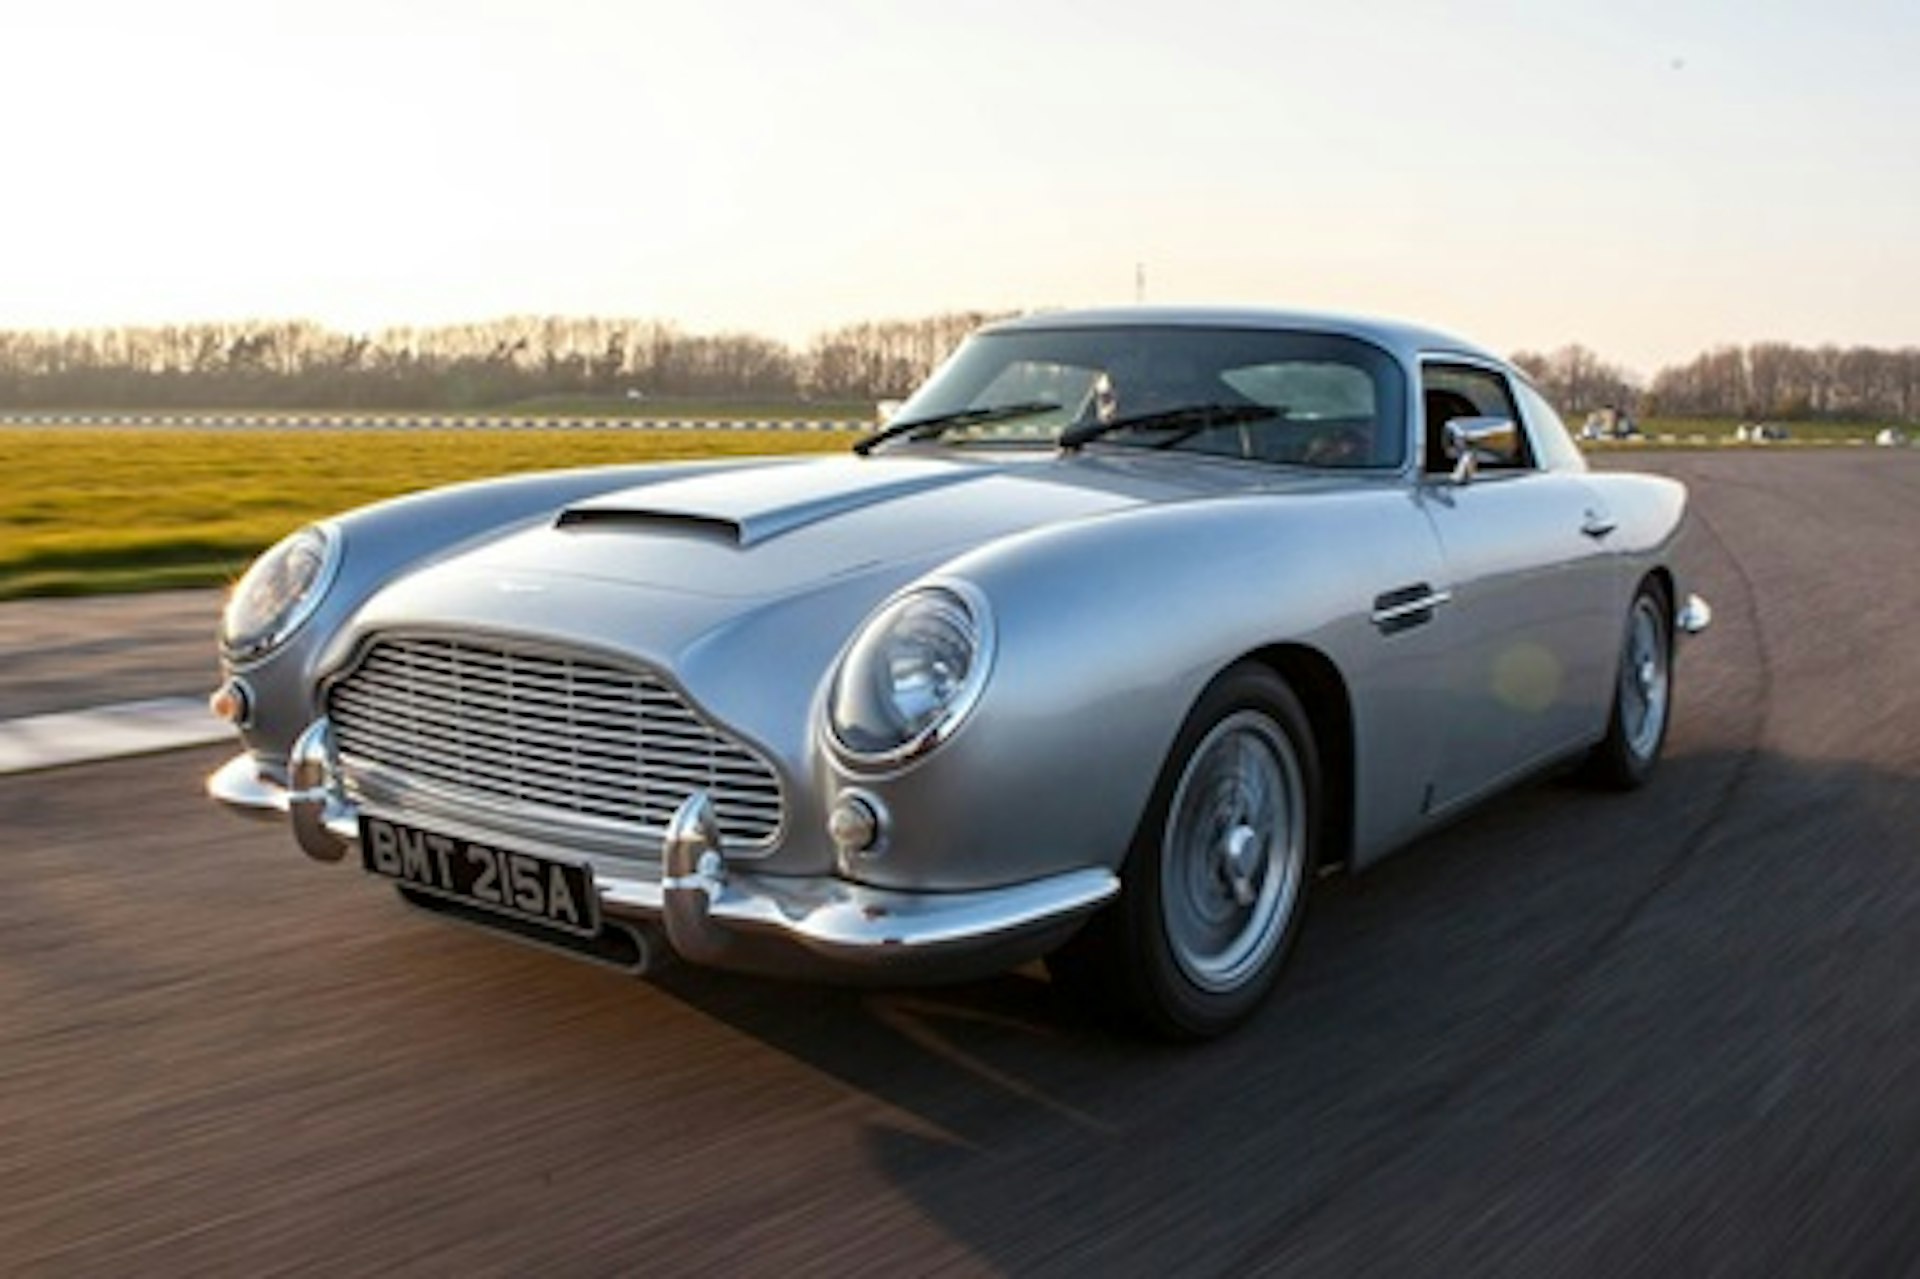 Aston Martin Double Driving Experience with High Speed Passenger Ride 3